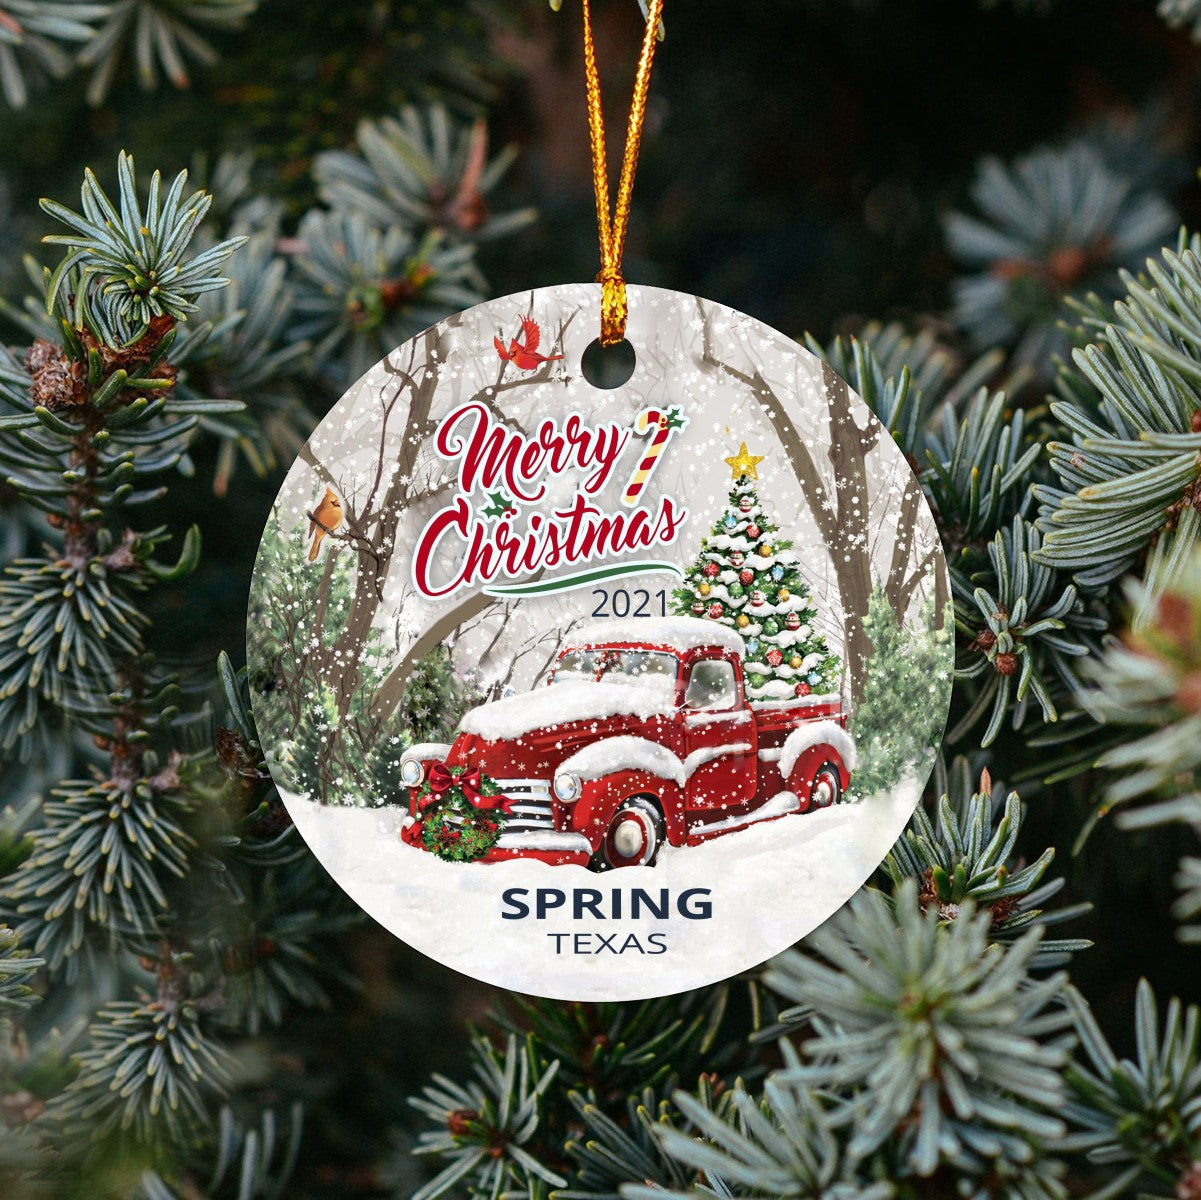 Christmas Tree Ornaments Spring - Ornament Customize With Name City And State Spring Texas TX - Red Truck Xmas Ornaments 3'' Plastic Gift For Family, Friend And Housewarming